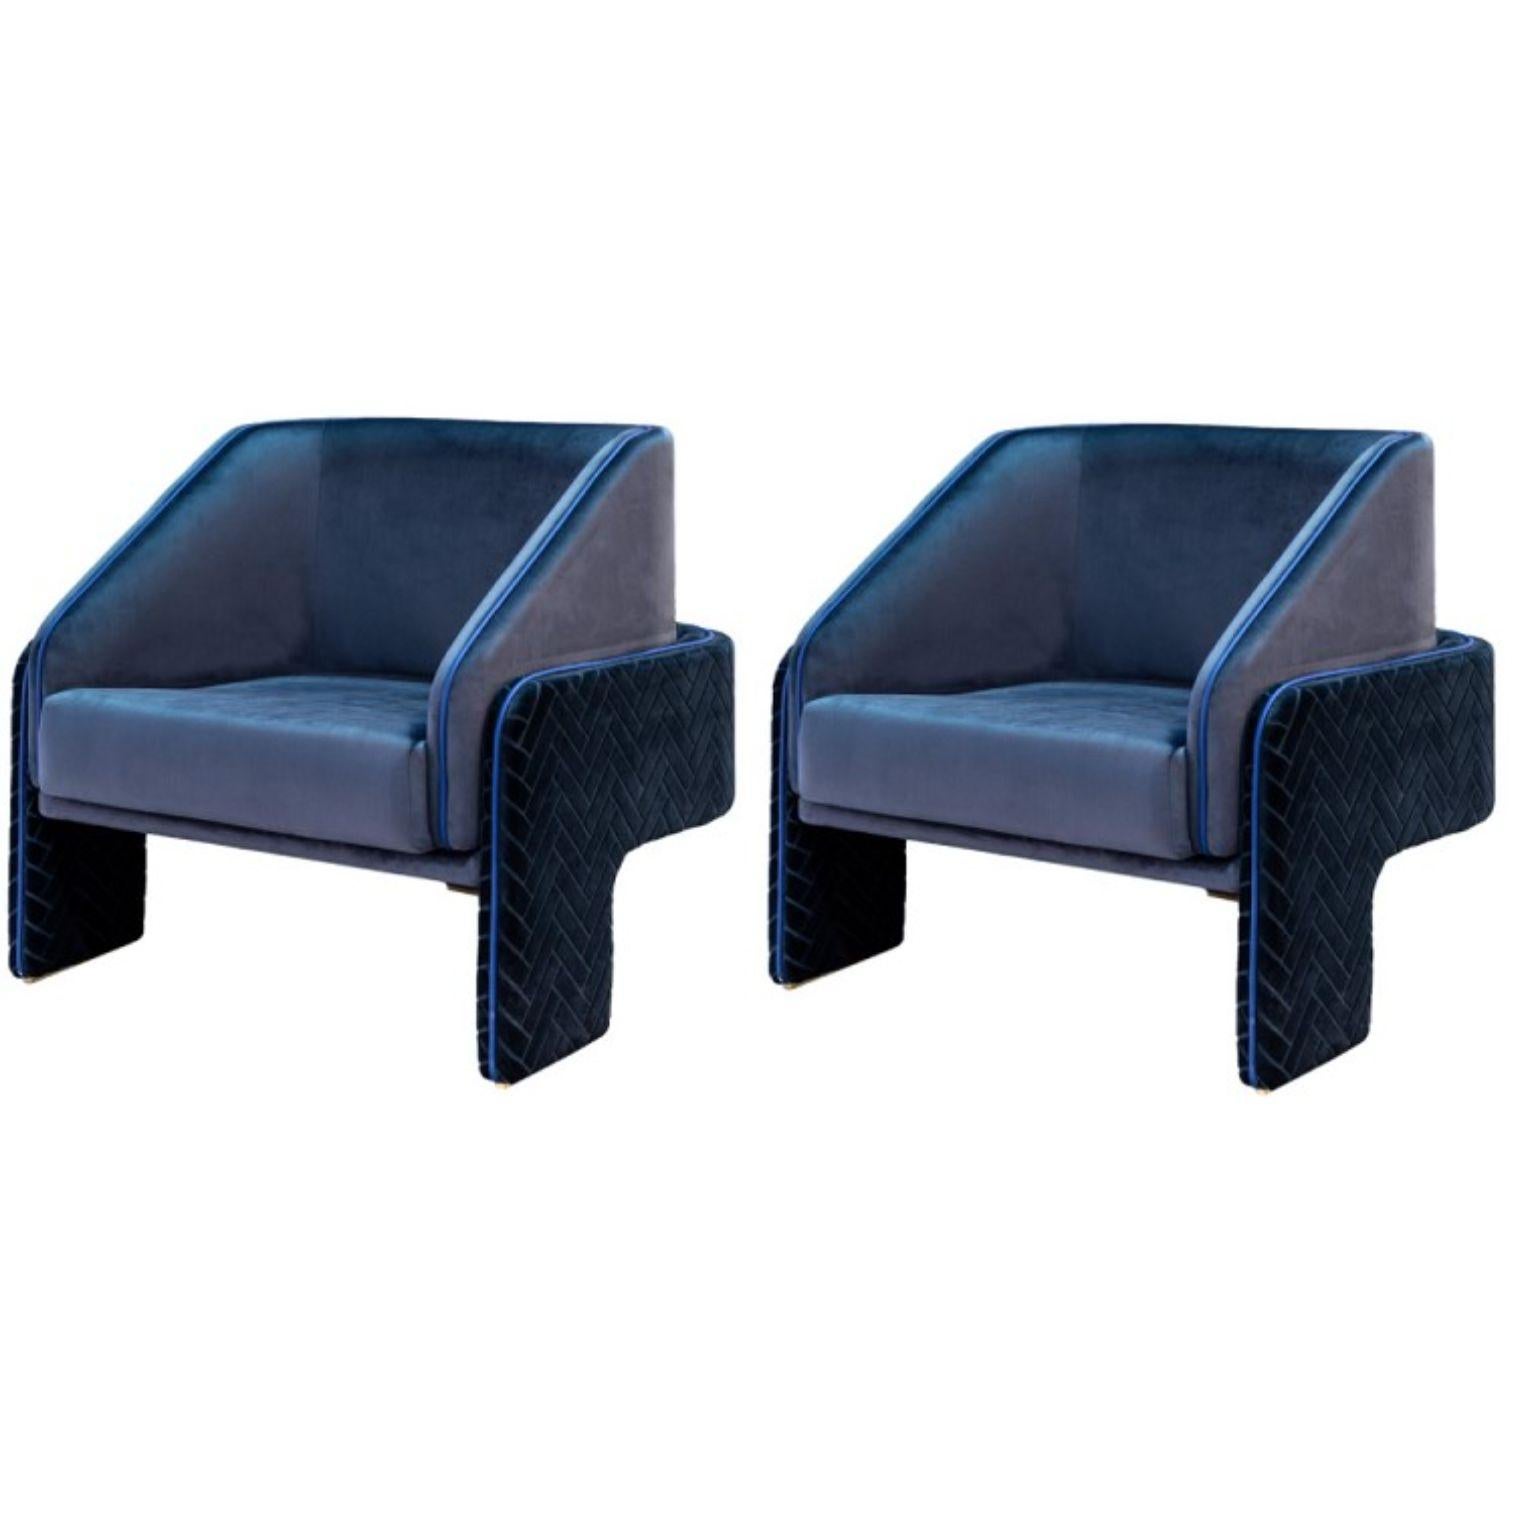 Set of 2 L’unité armchairs by Dooq
Measures: W 85 cm 33”
D 81 cm 31”
H 74 cm 29”
seat height 41 cm 16”

Materials: upholstery fabric or leather
Feet stainless steel plated polished or satin:
Brass, copper or nickel
COM/COL requirements: